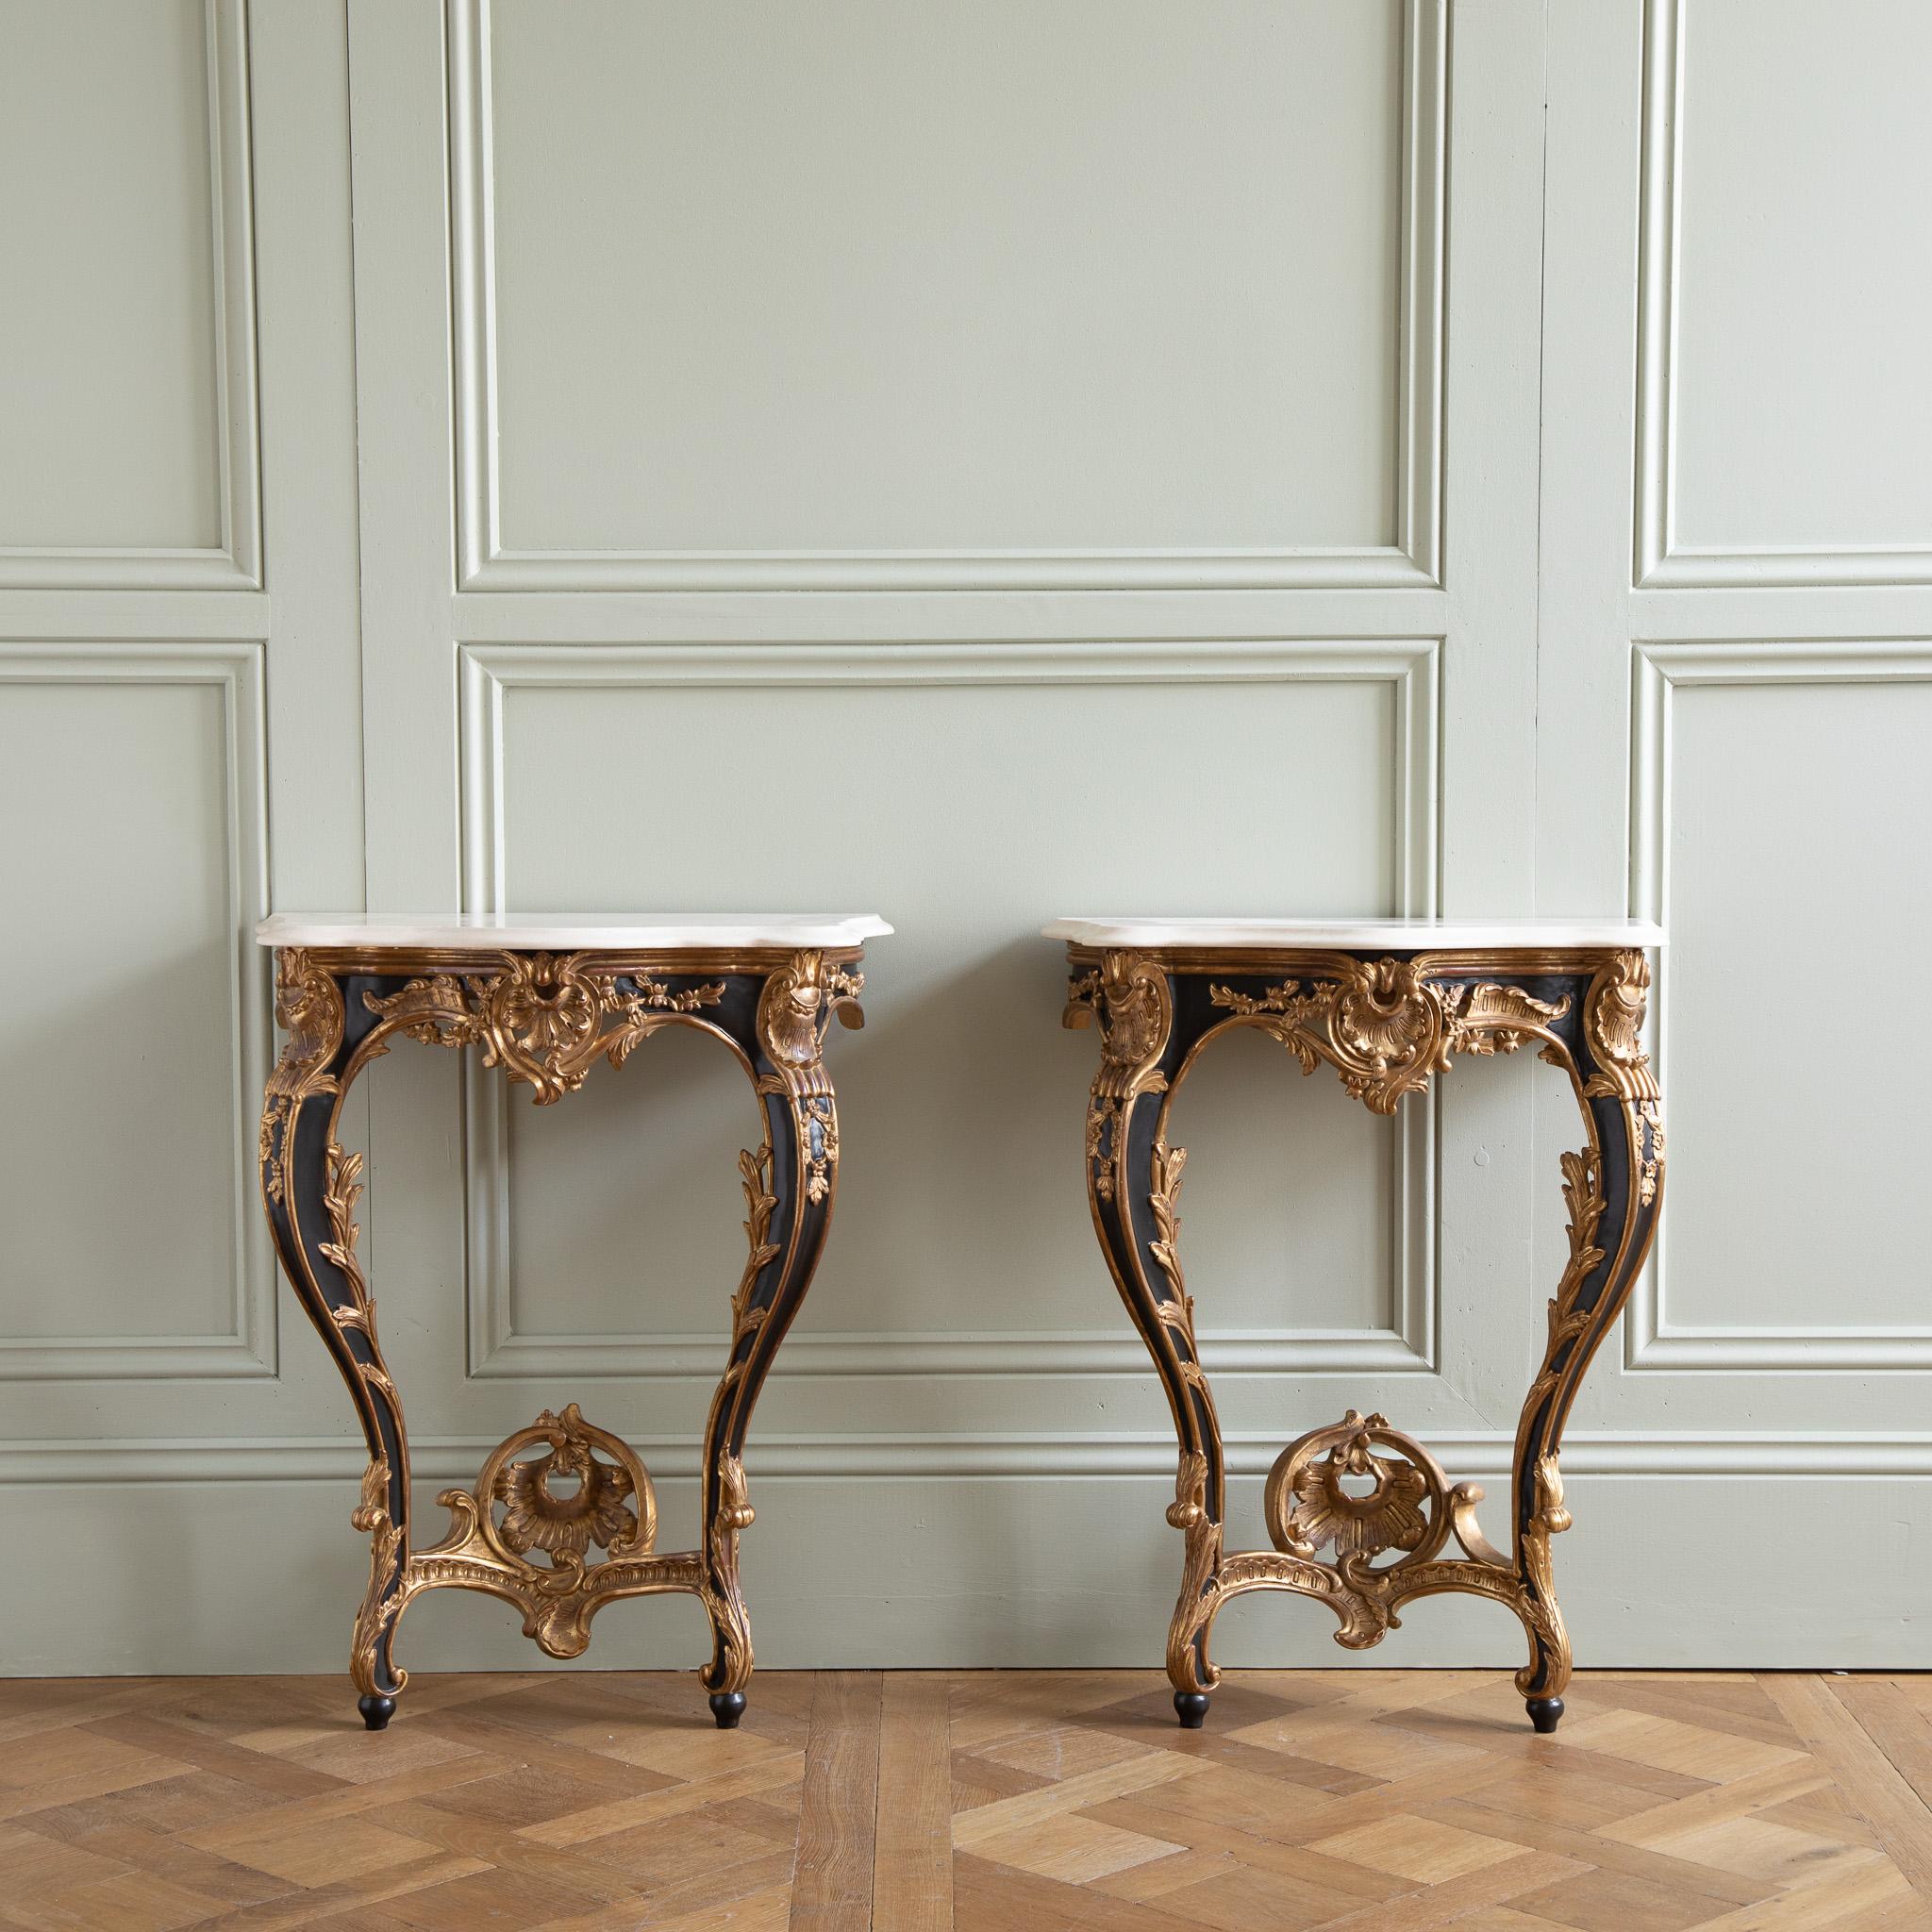 A pair of Louis XV style consoles, hand-carved by master craftsmen and finished in a hand lacquered with gold highlights, slightly aged and distressed patina. Includes a bevel-cut Crema Marfil marble which has been honed and lightly polished.